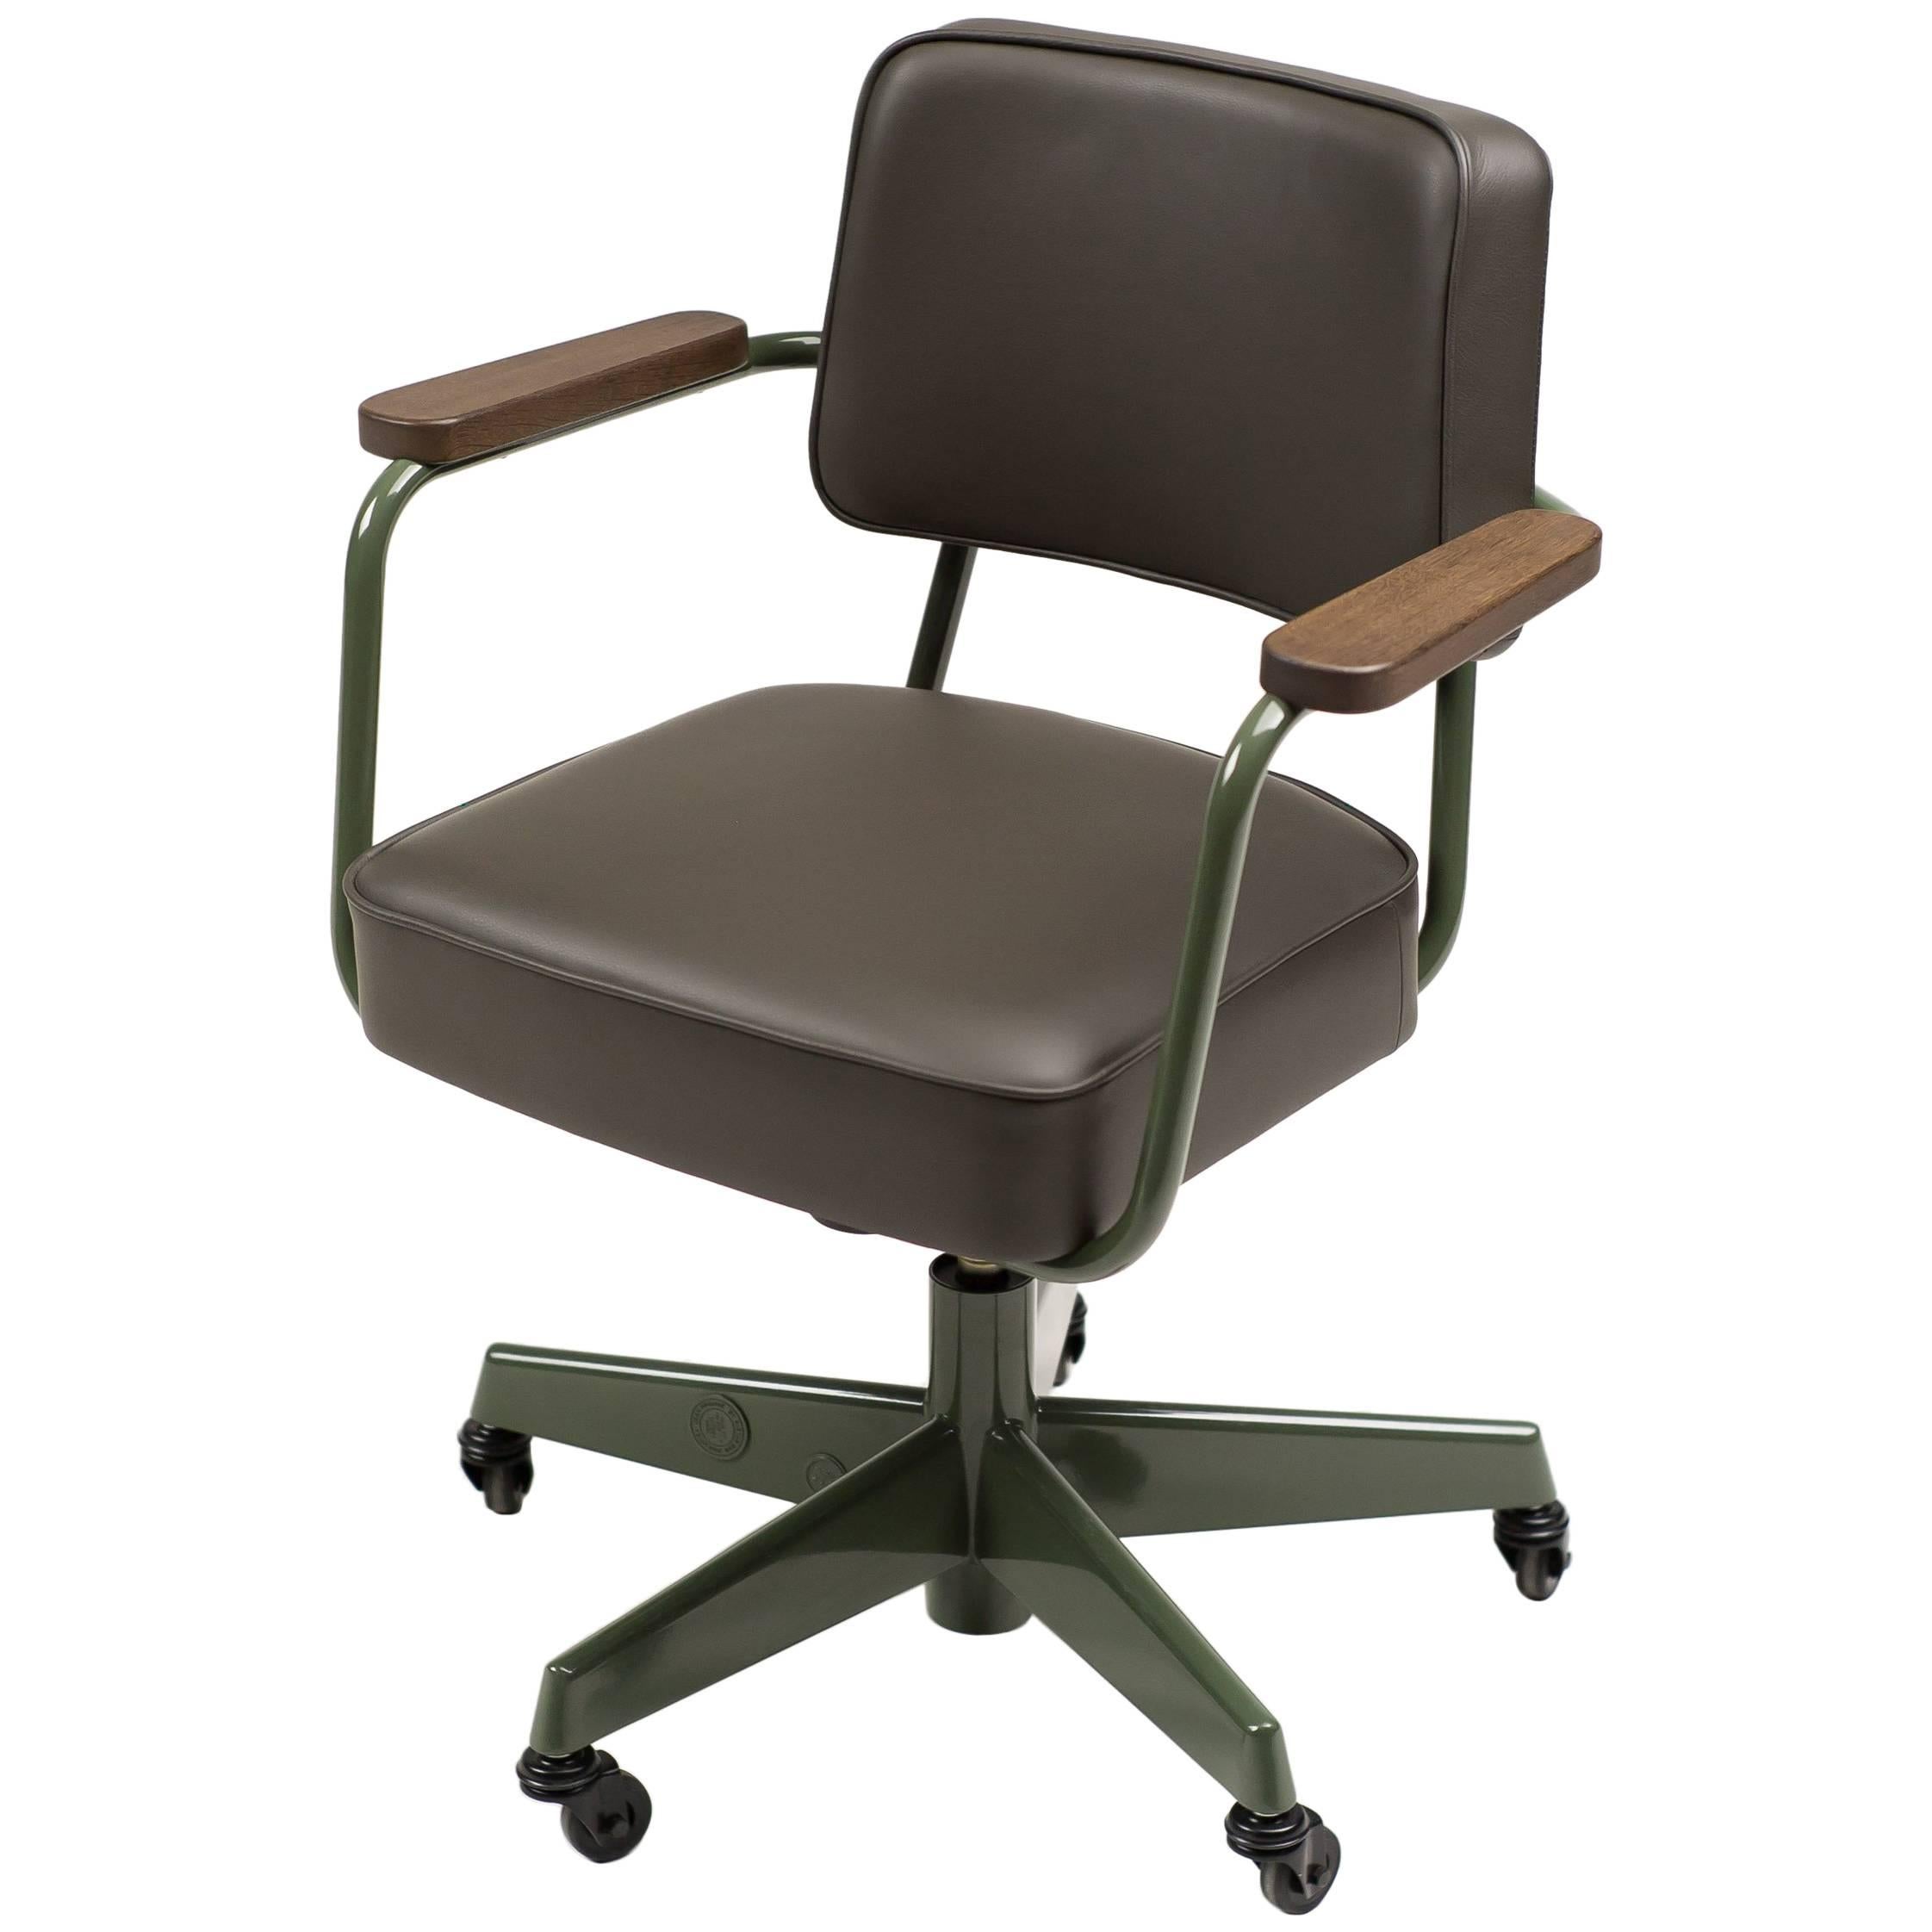 Jean Prouvé Fauteuil Direction Pivotant, G-Star Raw Edition by Vitra